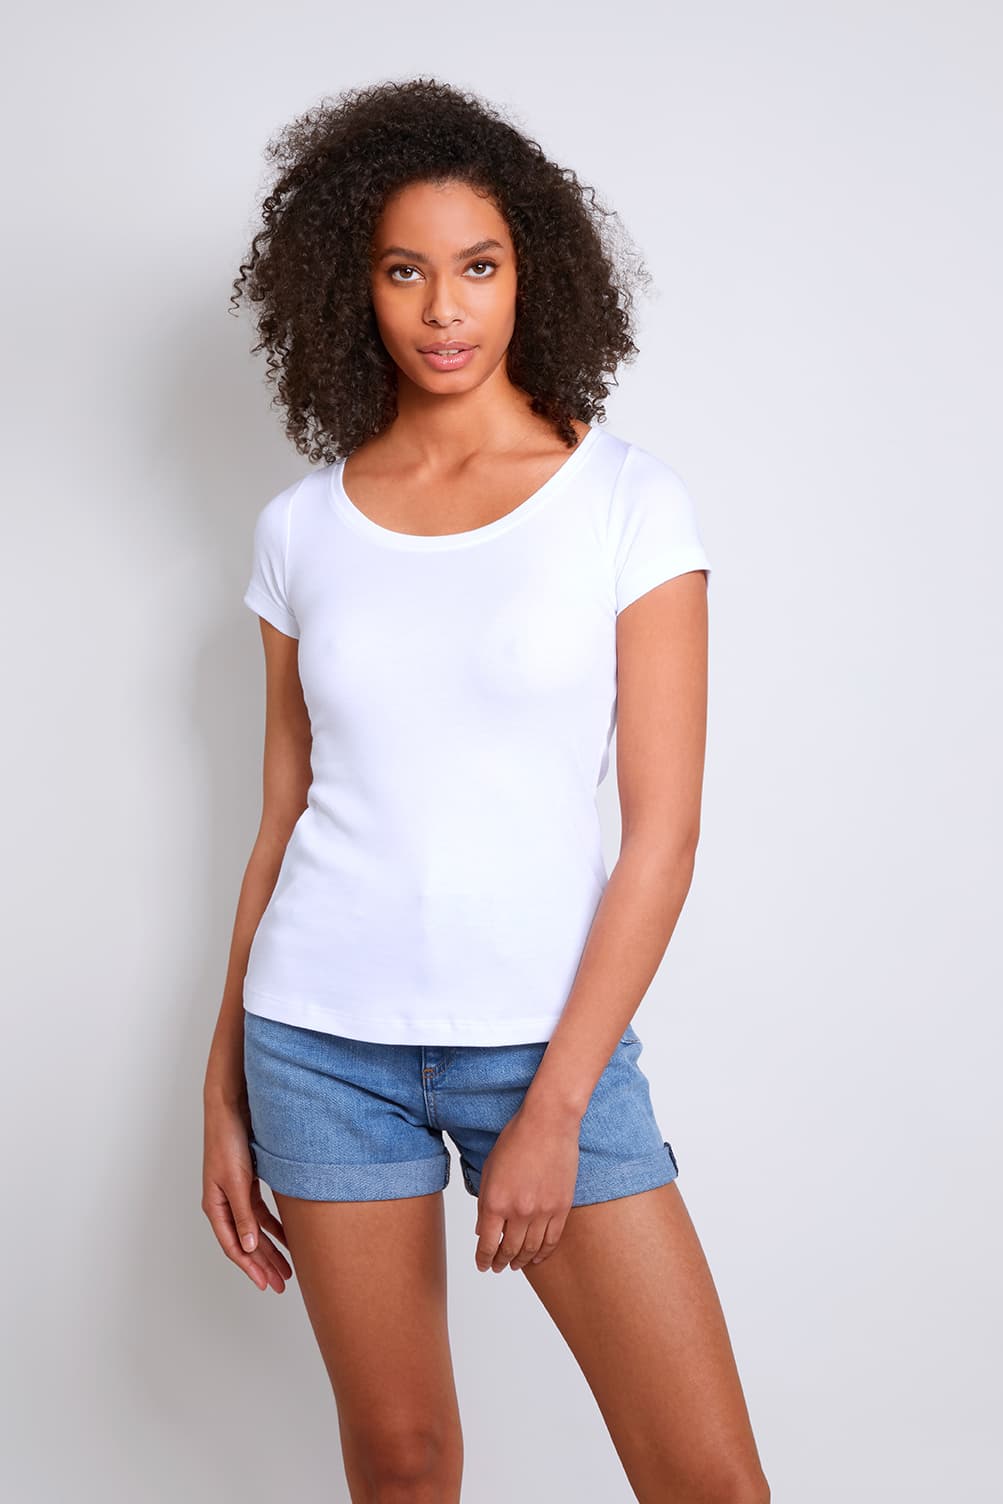 Women's Scoop Neck Cotton Modal Blend T-shirt in White - Short Sleeve Quality T-shirt by Lavender Hill Clothing